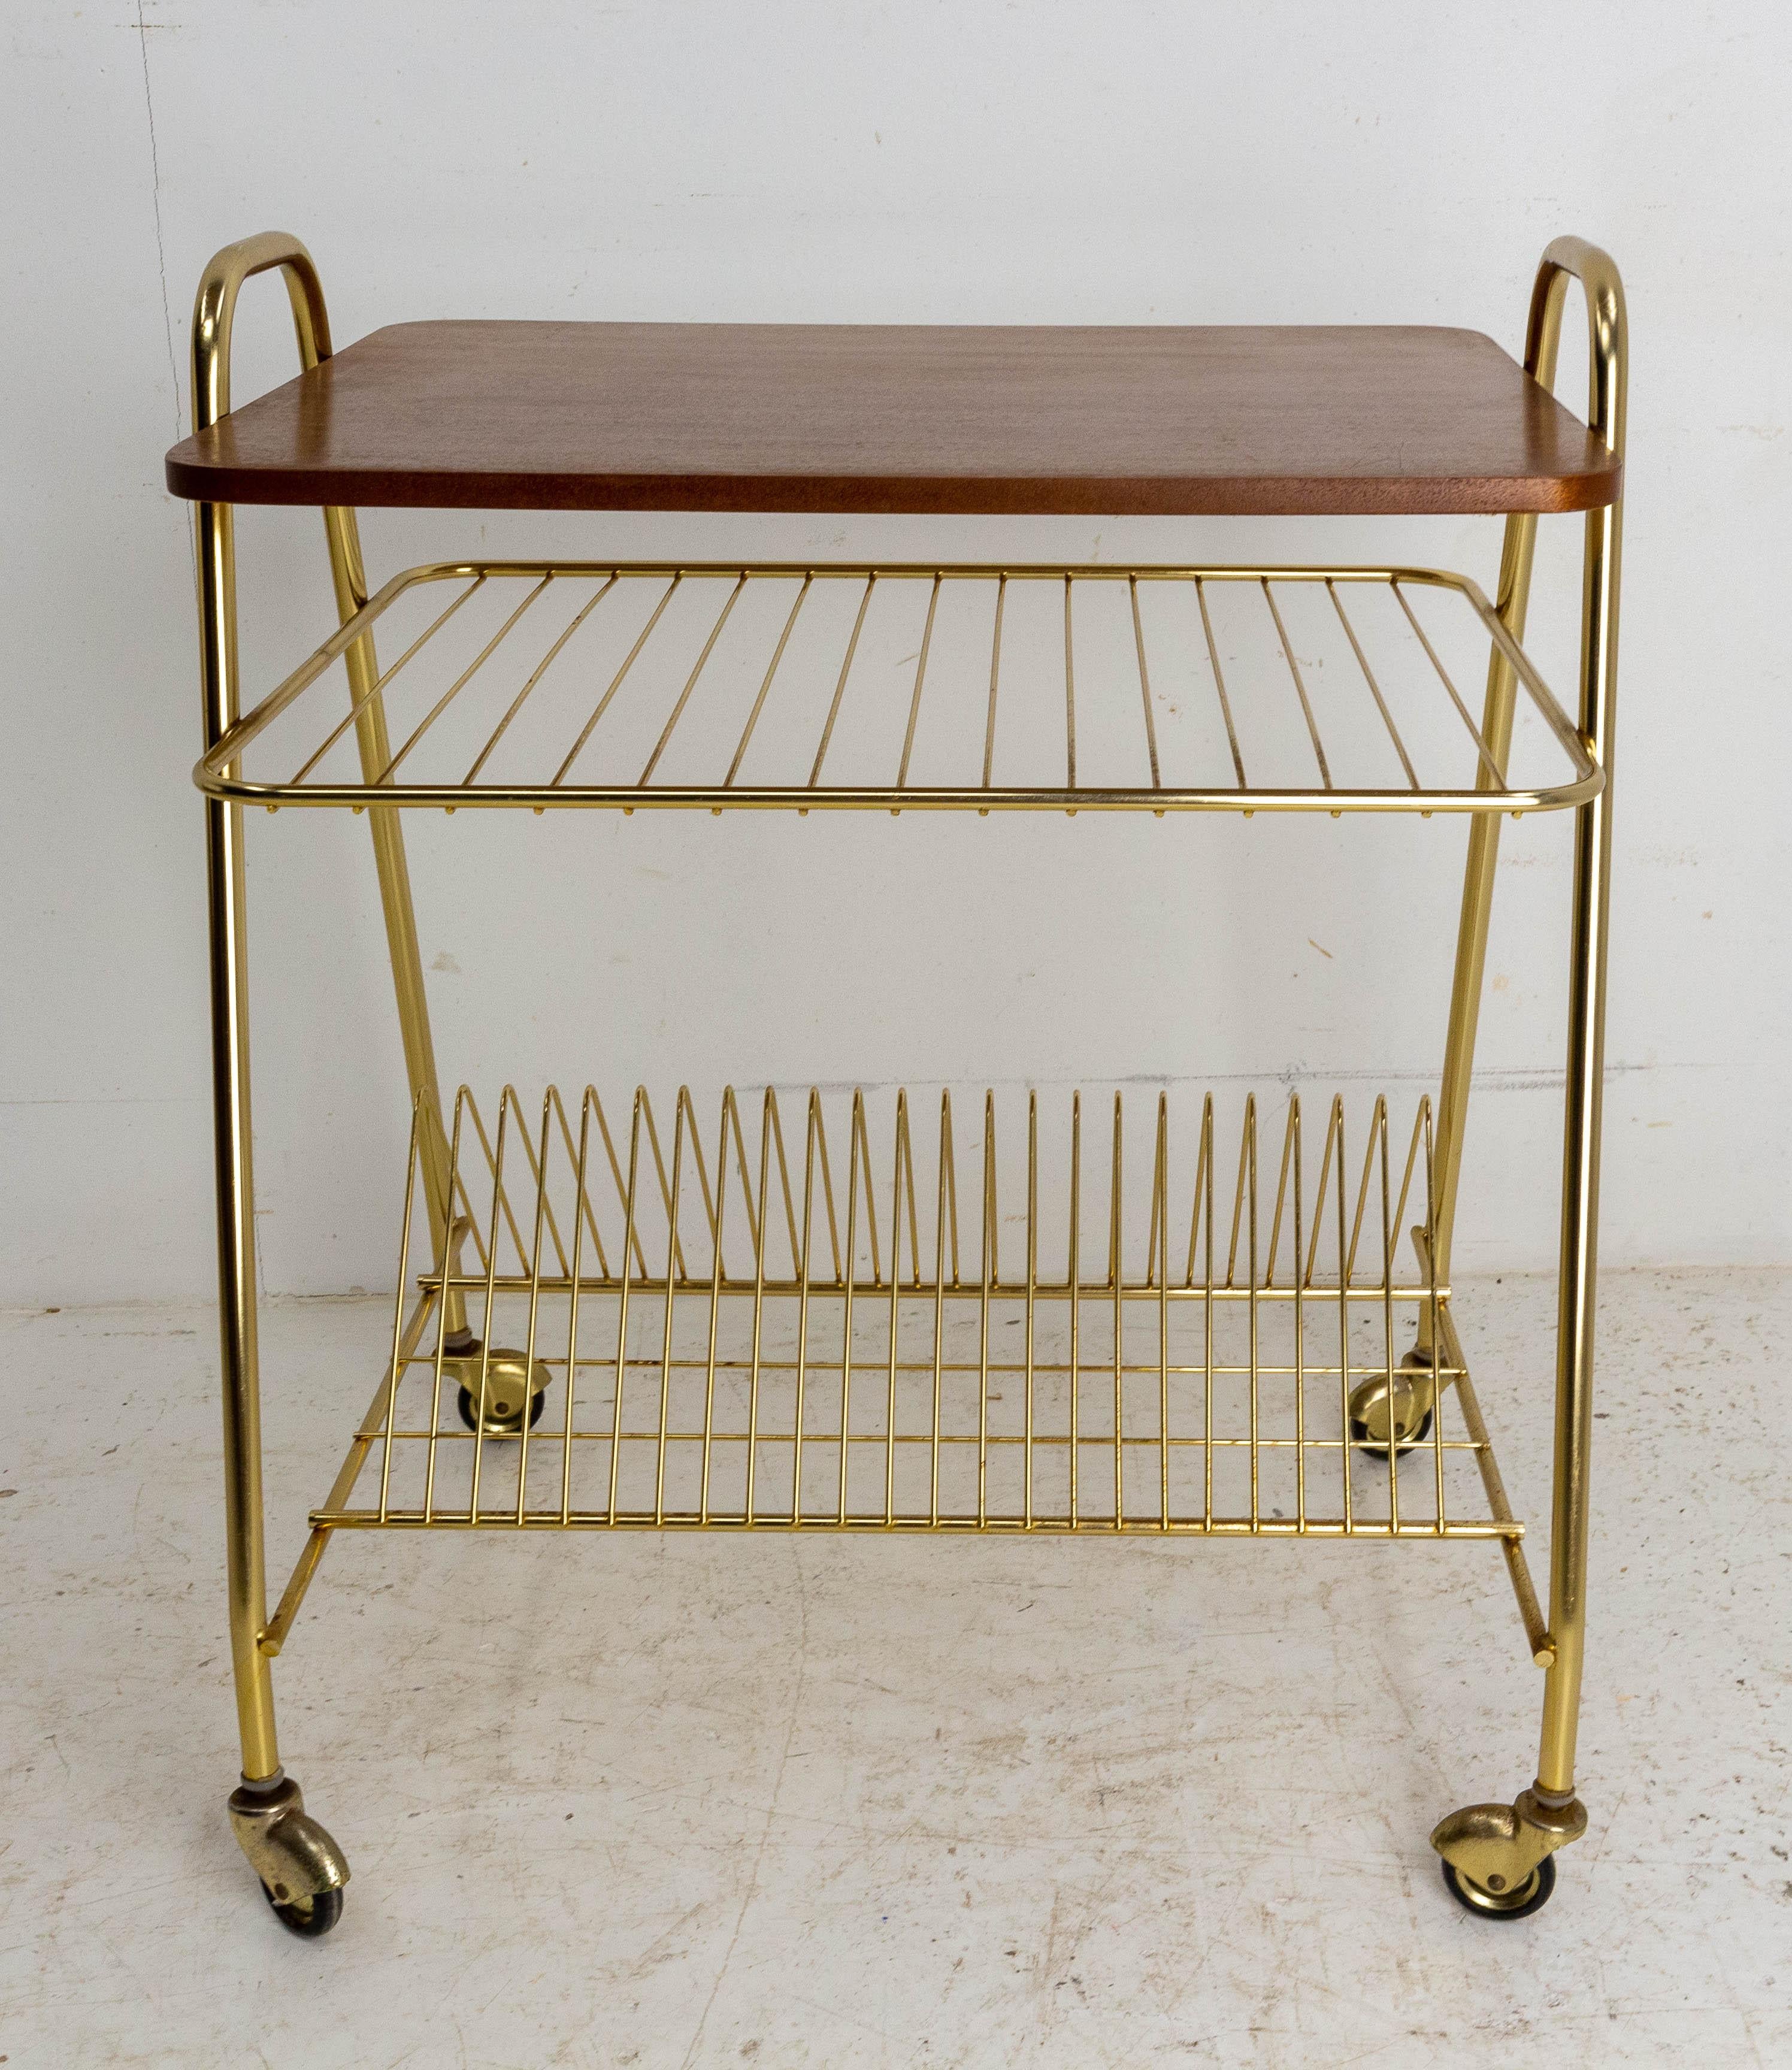 Vintage iroko wood and golden chrome dessert trolley or side table.
French, circa 1960.
Good vintage condition.

Shipping:
L53 P42 H64 5.5 Kg.